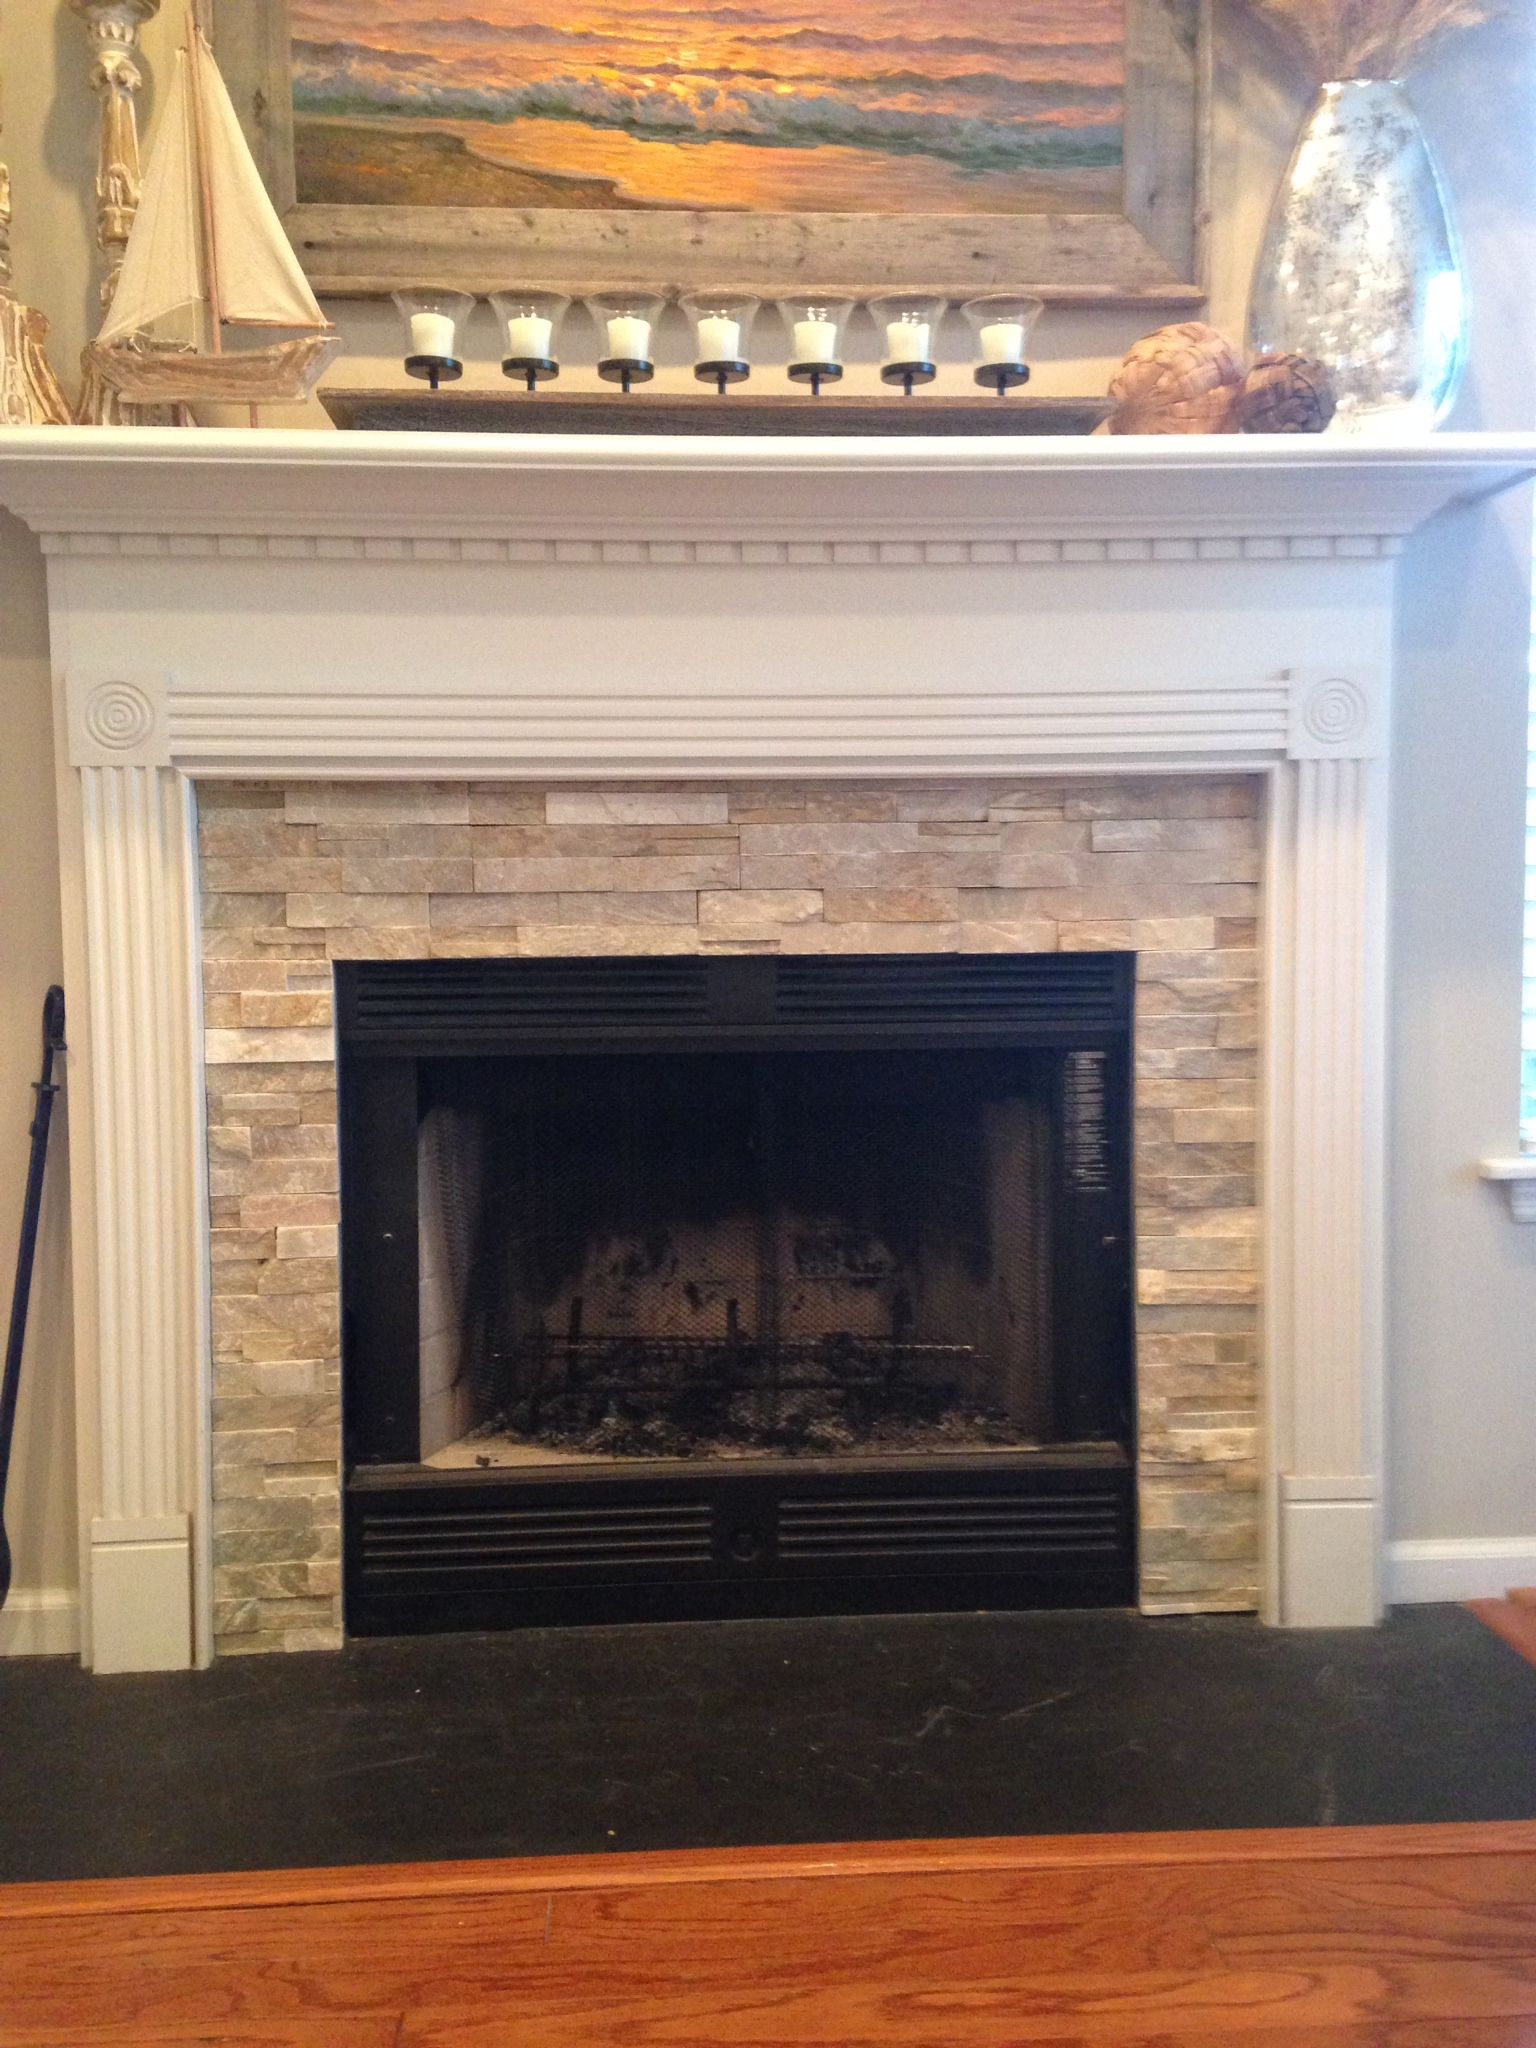 Different Types Of Fireplaces Elegant Fireplace Idea Mantel Wainscoting Design Craftsman